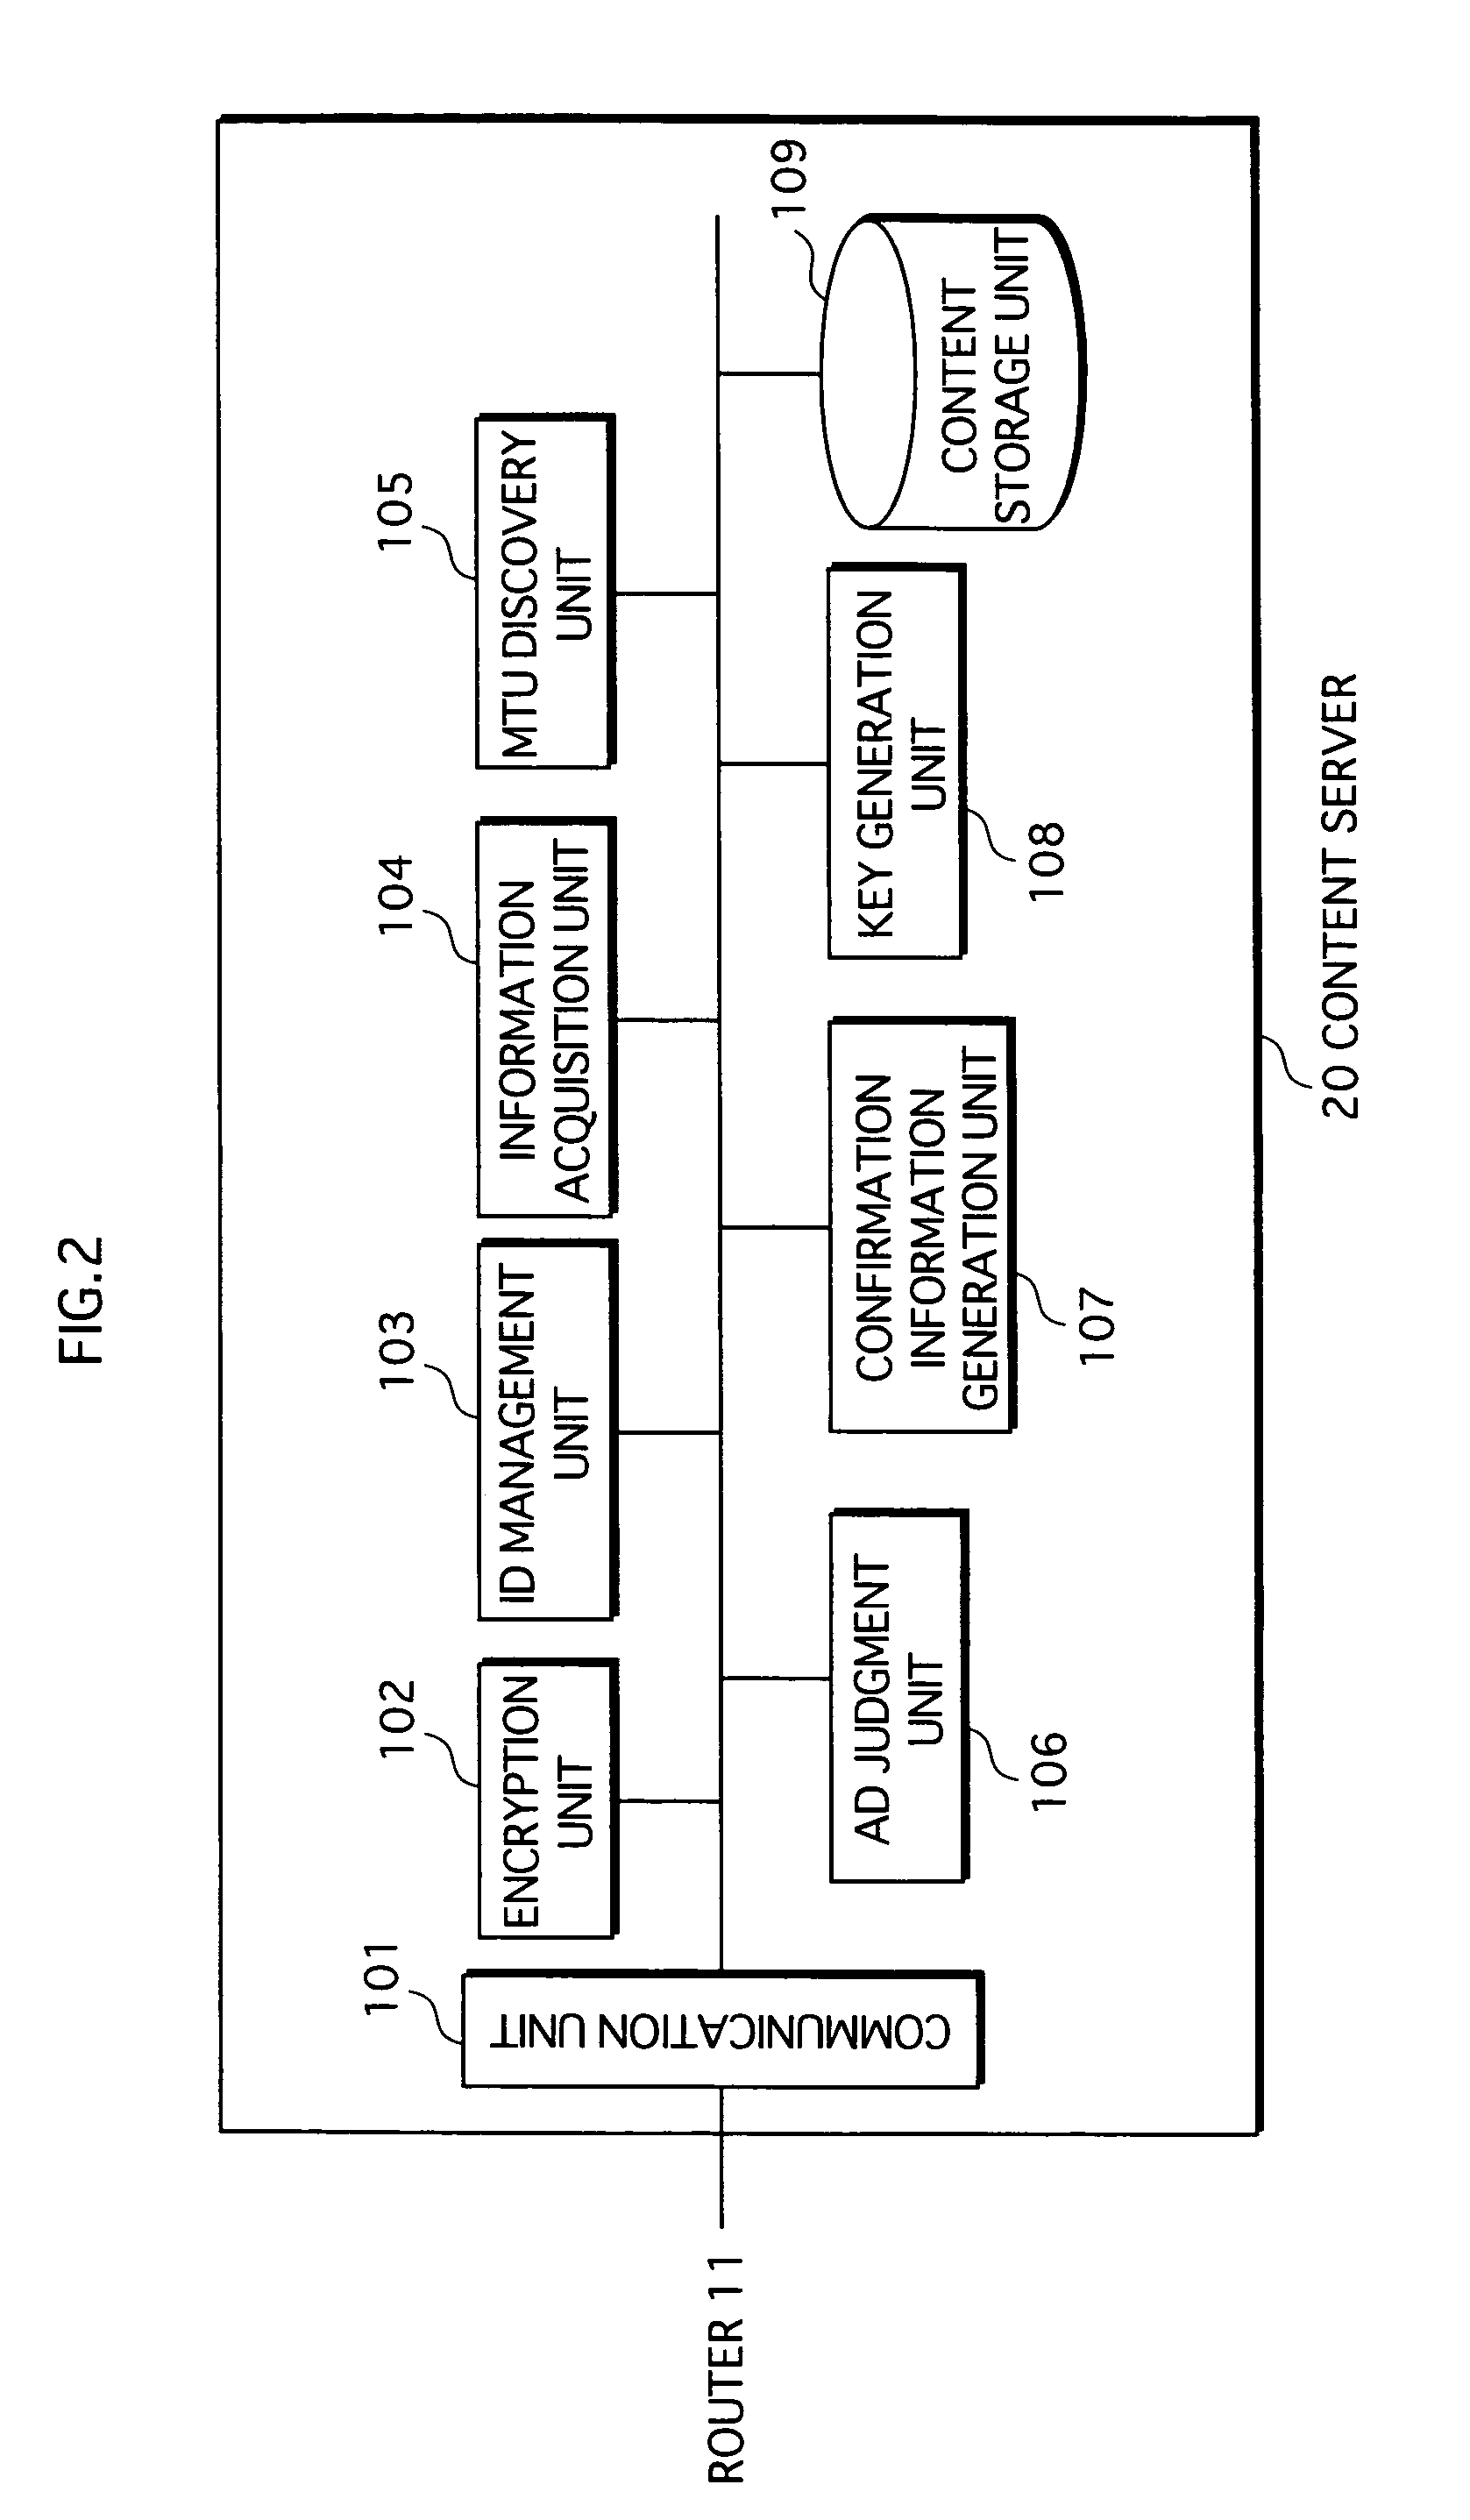 Content distribution system